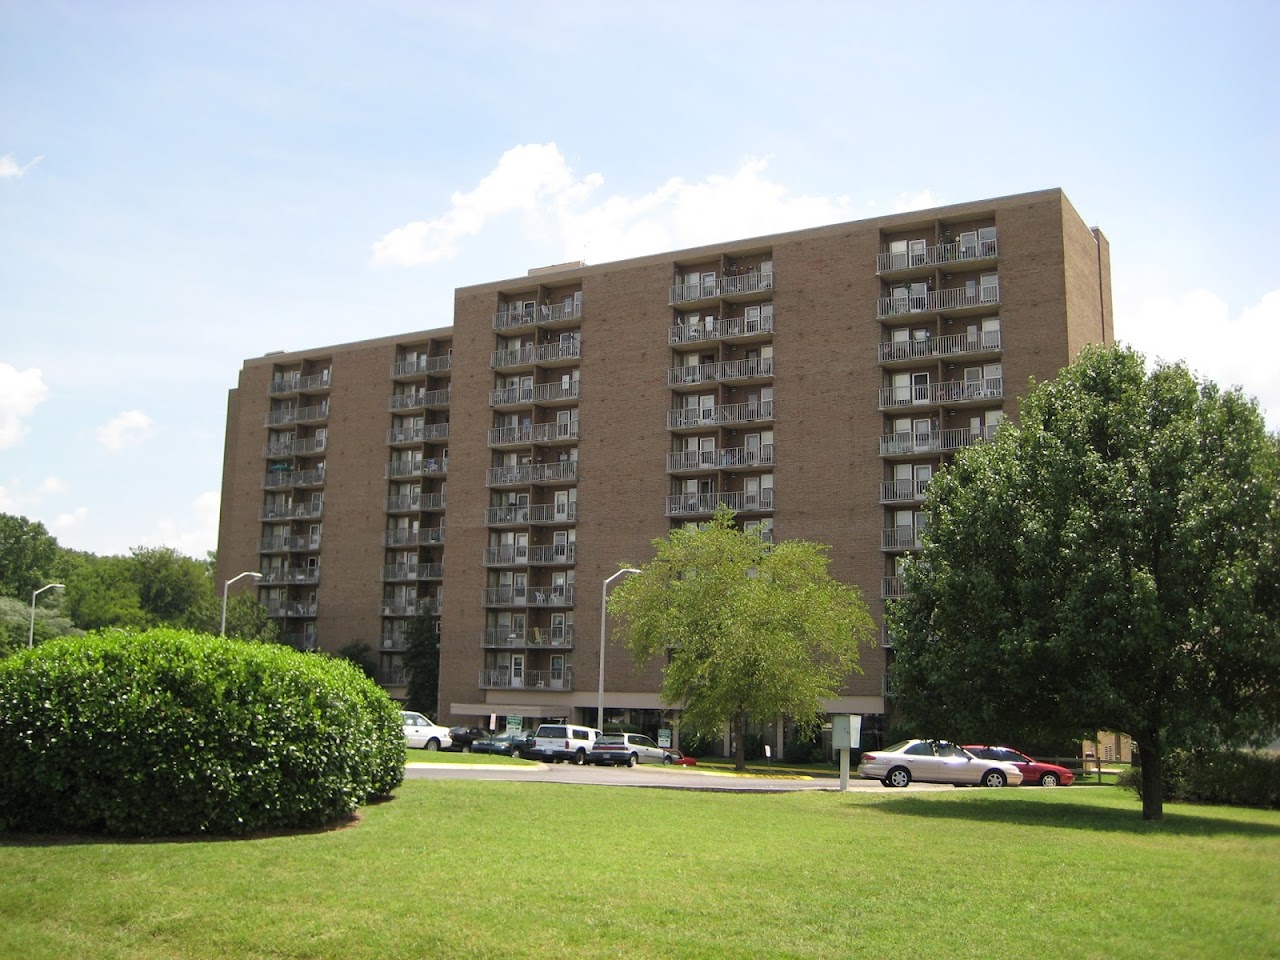 Photo of OLD HICKORY TOWERS. Affordable housing located at 930 INDUSTRIAL ROAD NASHVILLE, TN 37138